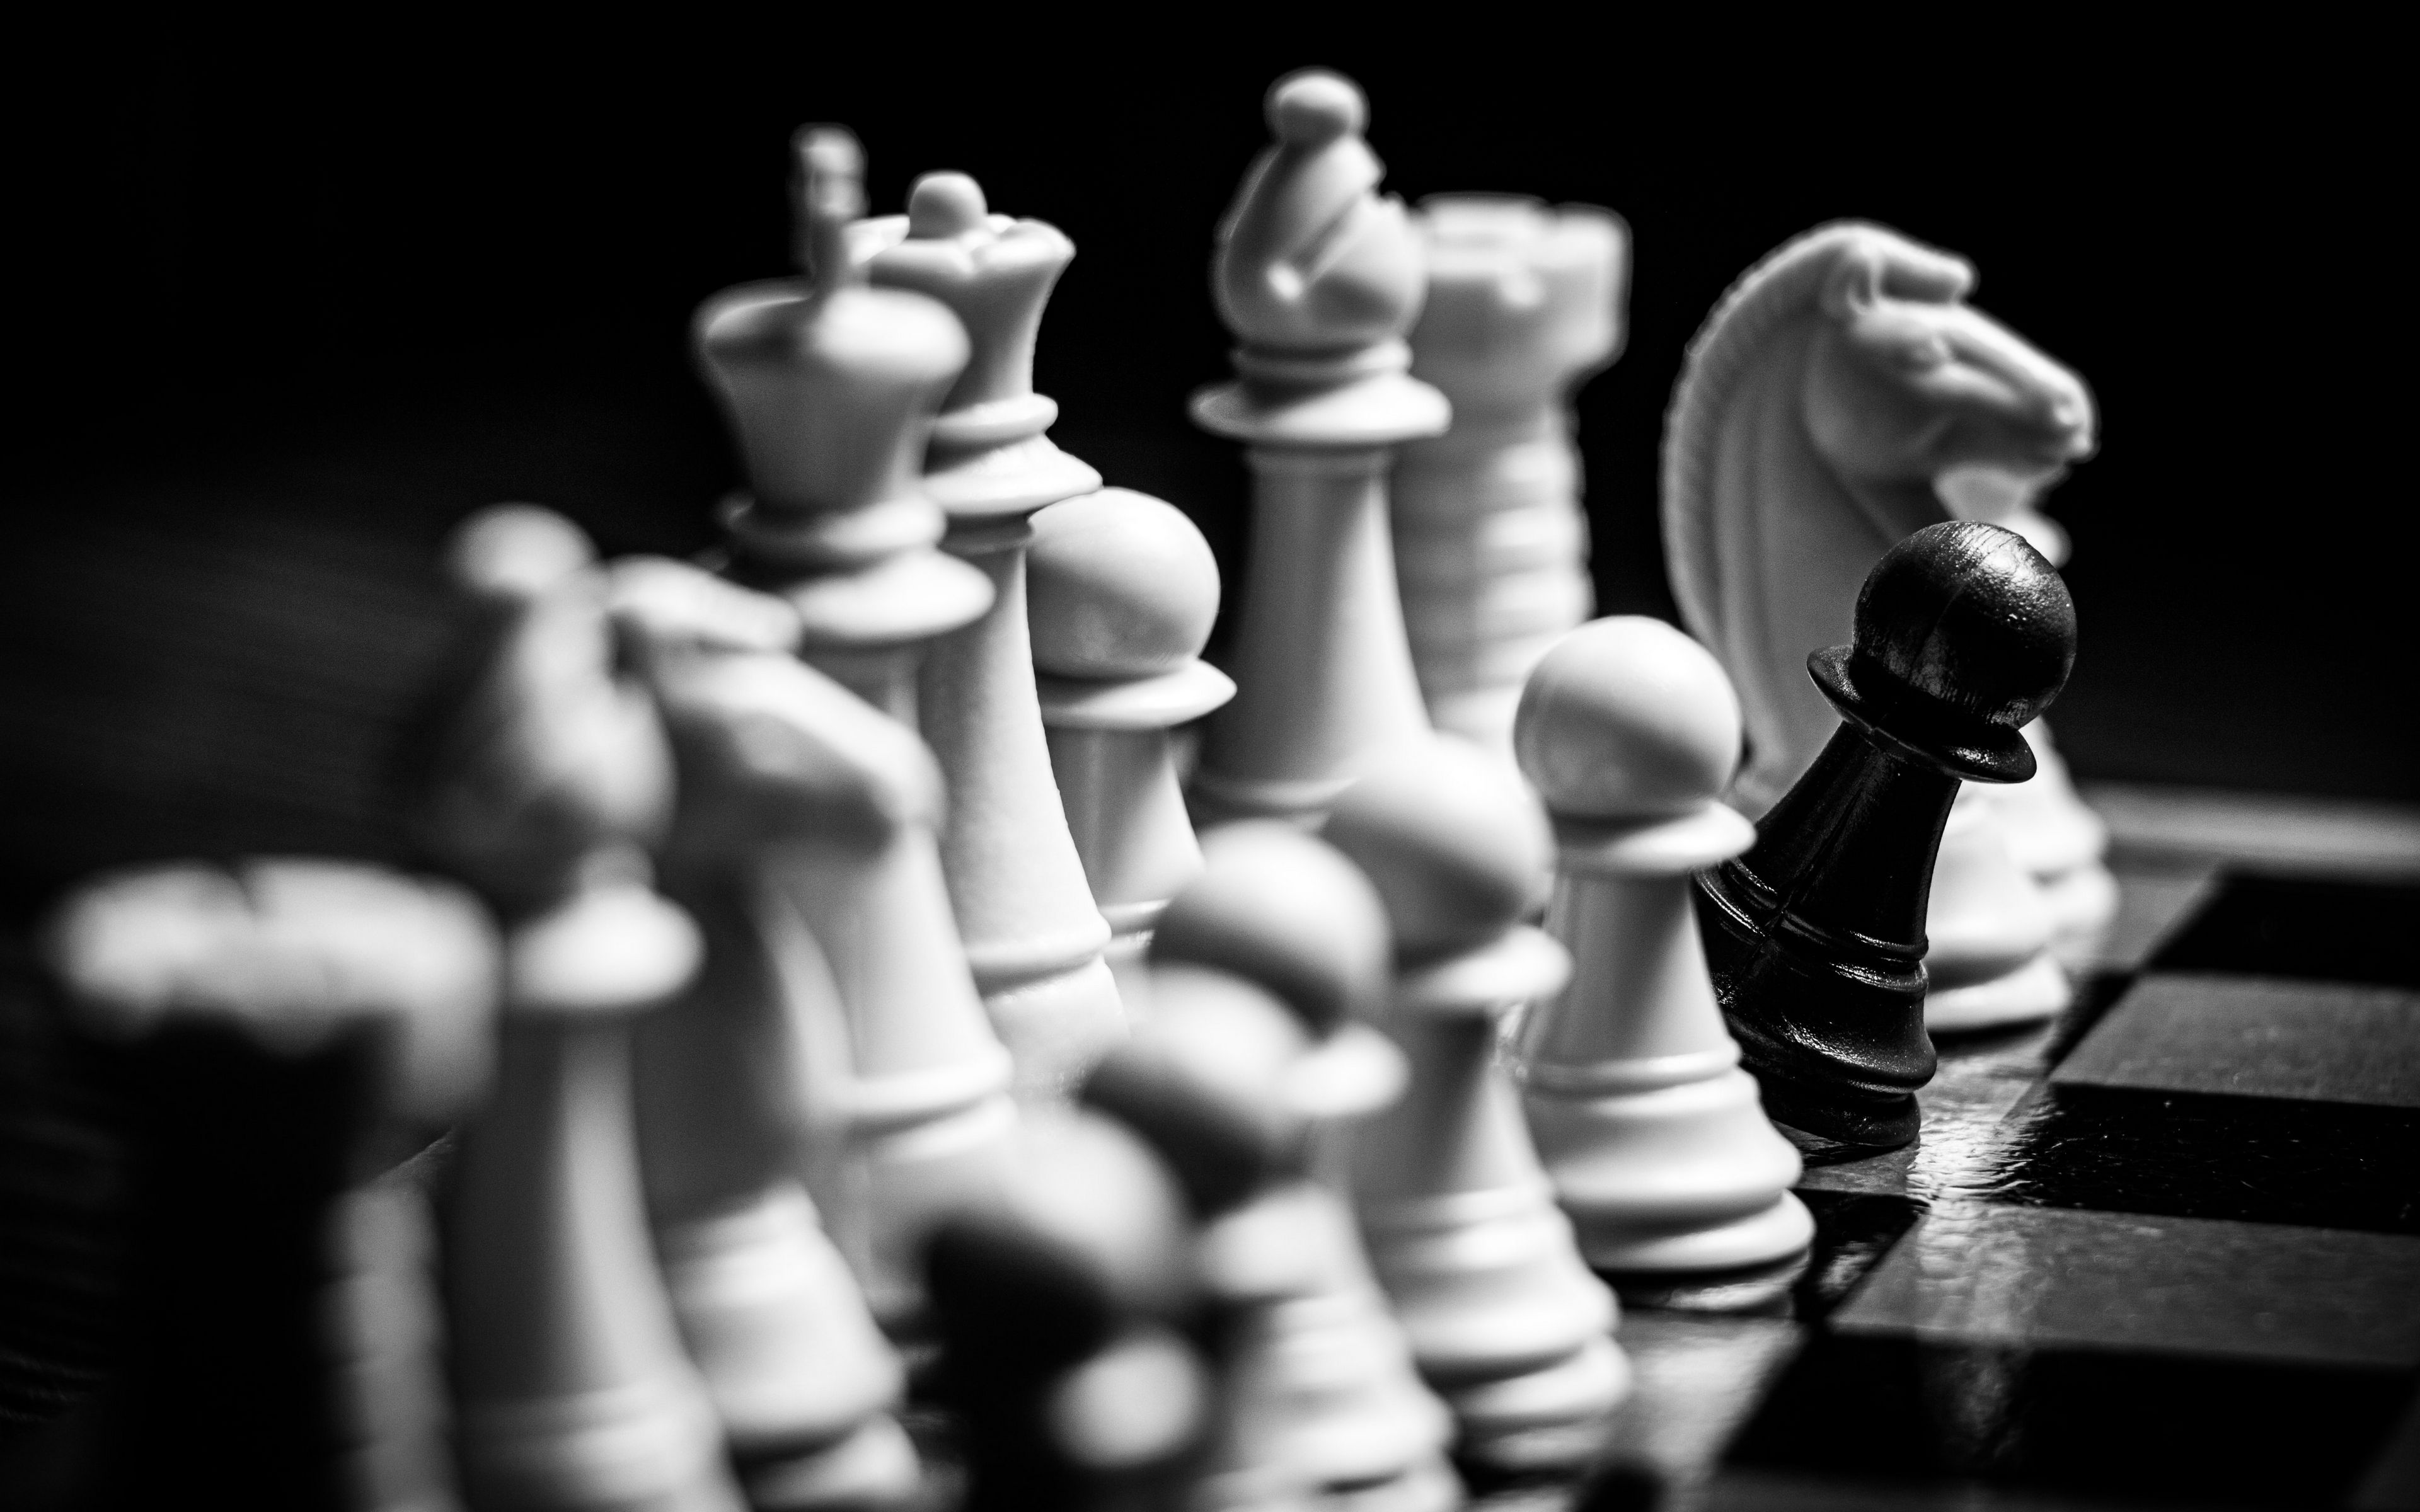 Download wallpaper 1350x2400 chess, pieces, board, game, games